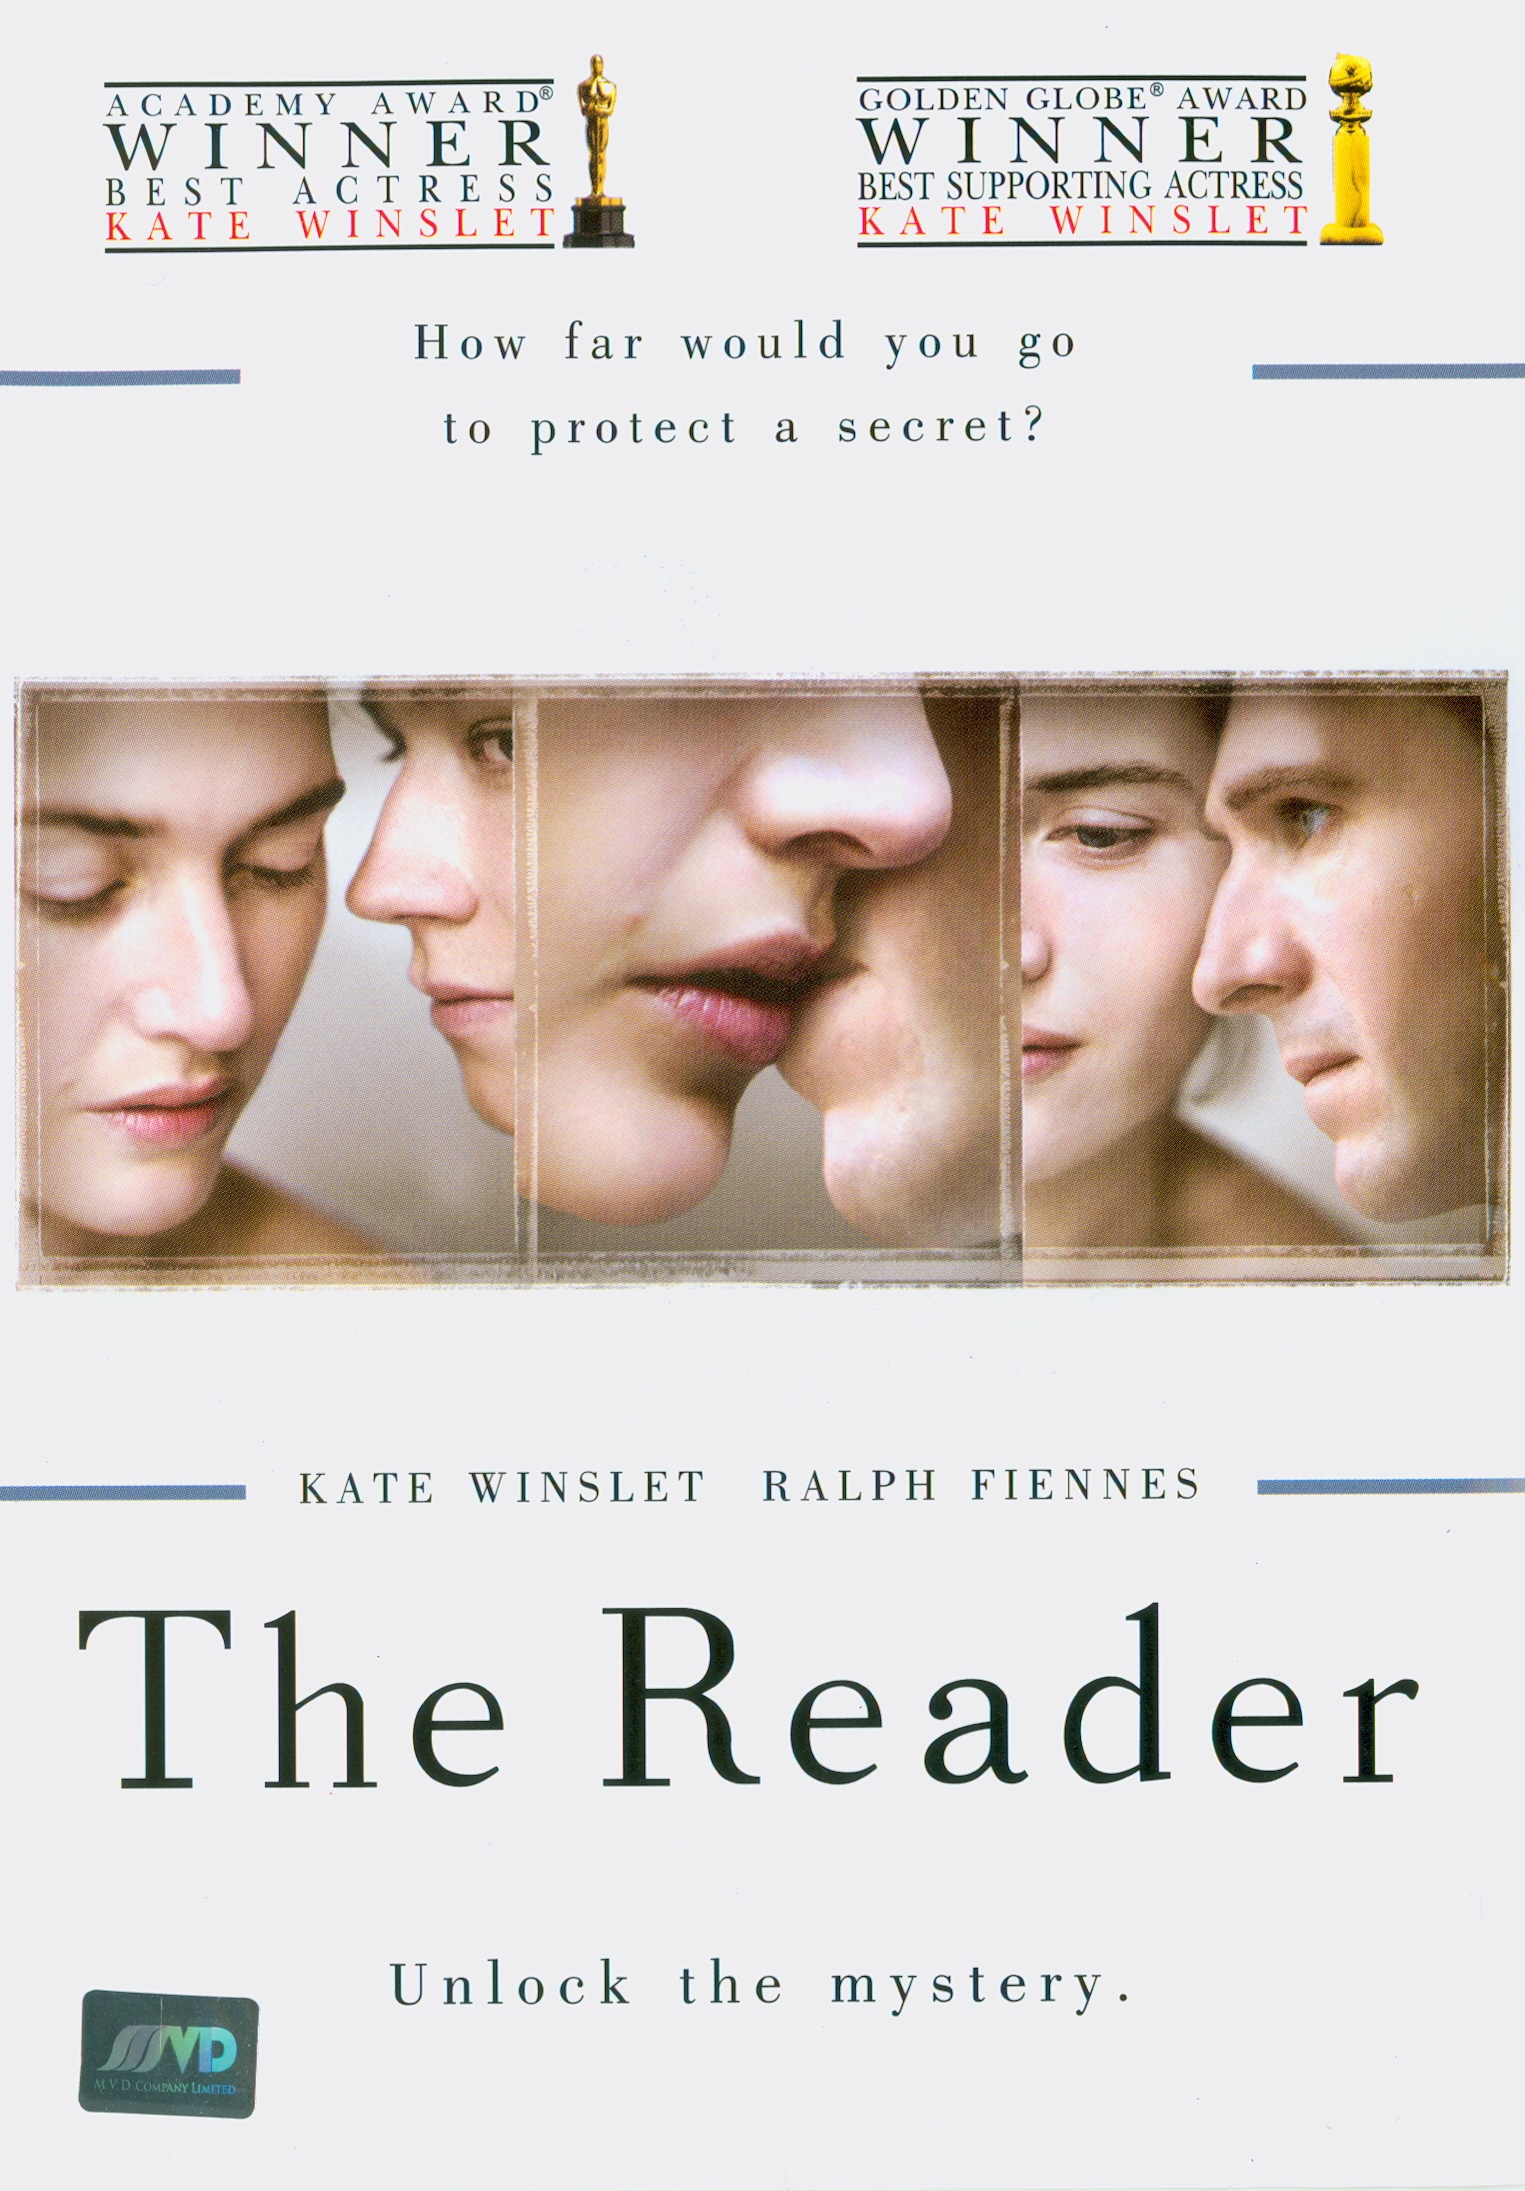  The reader